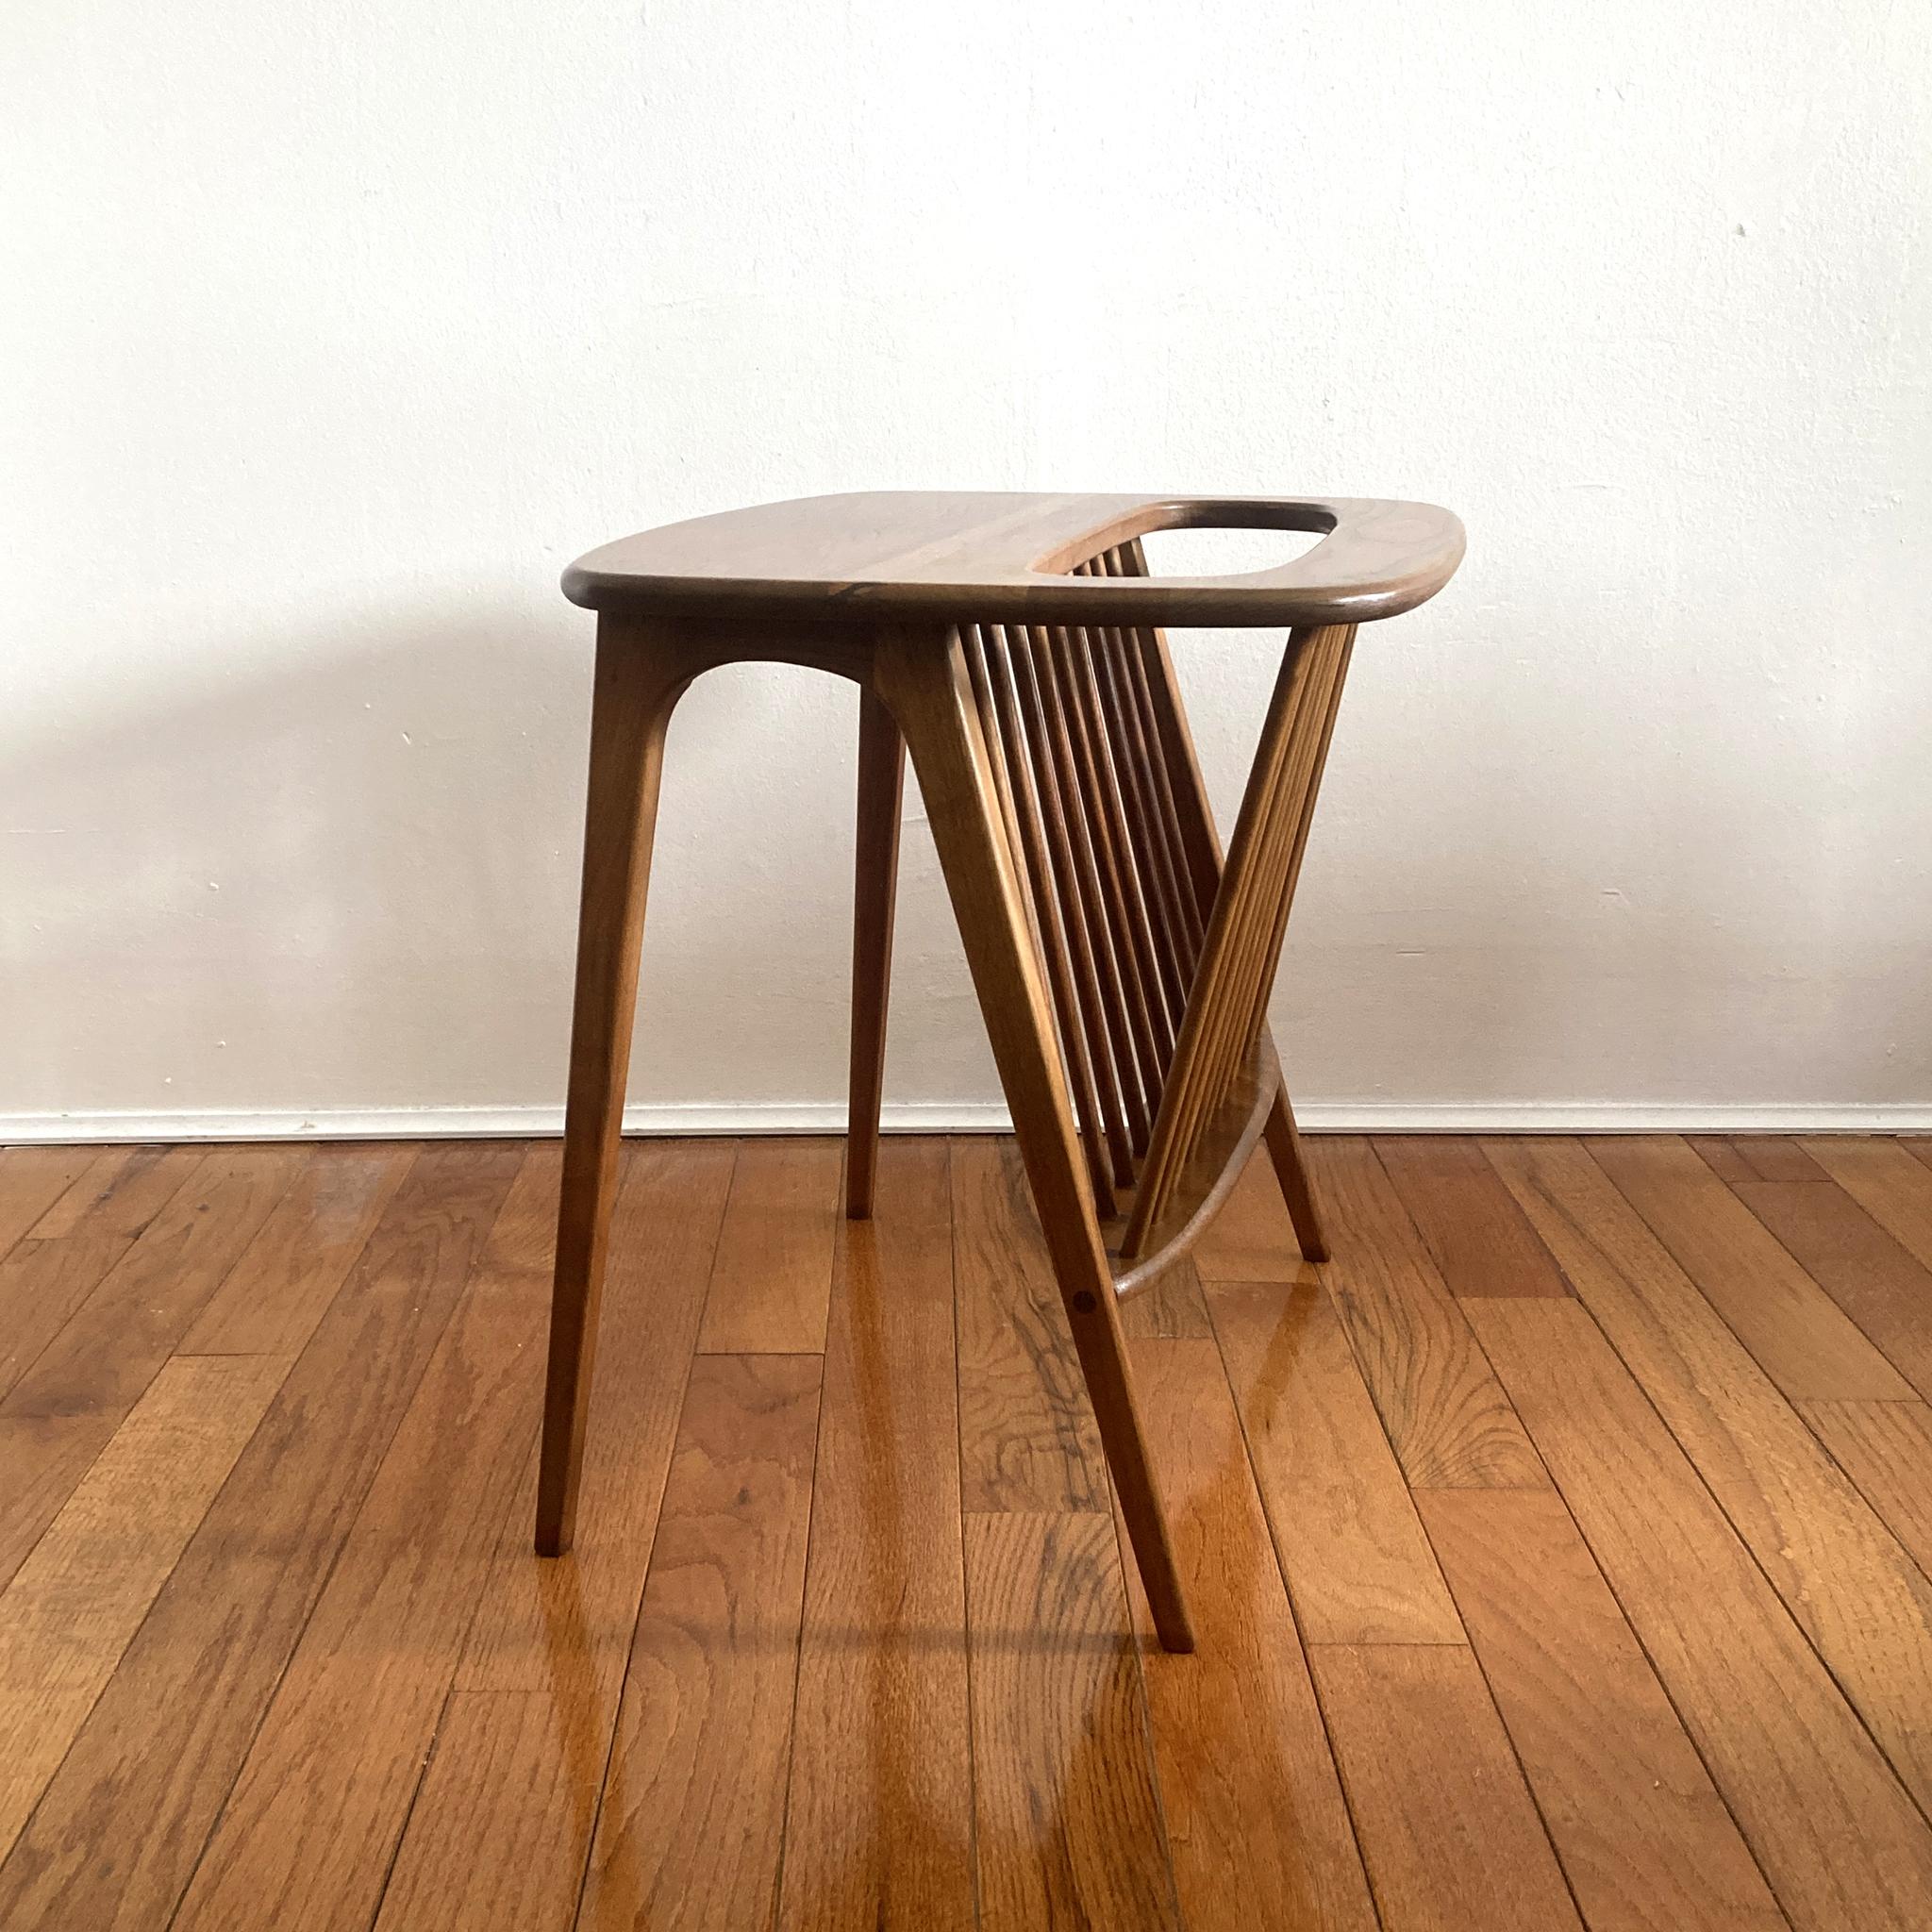 Mid-Century Modern solid walnut side table with magazine rack designed by Arthur Umanoff (1923-1985) for Washington Woodcraft in 1964. 

Dimensions: H 20.5